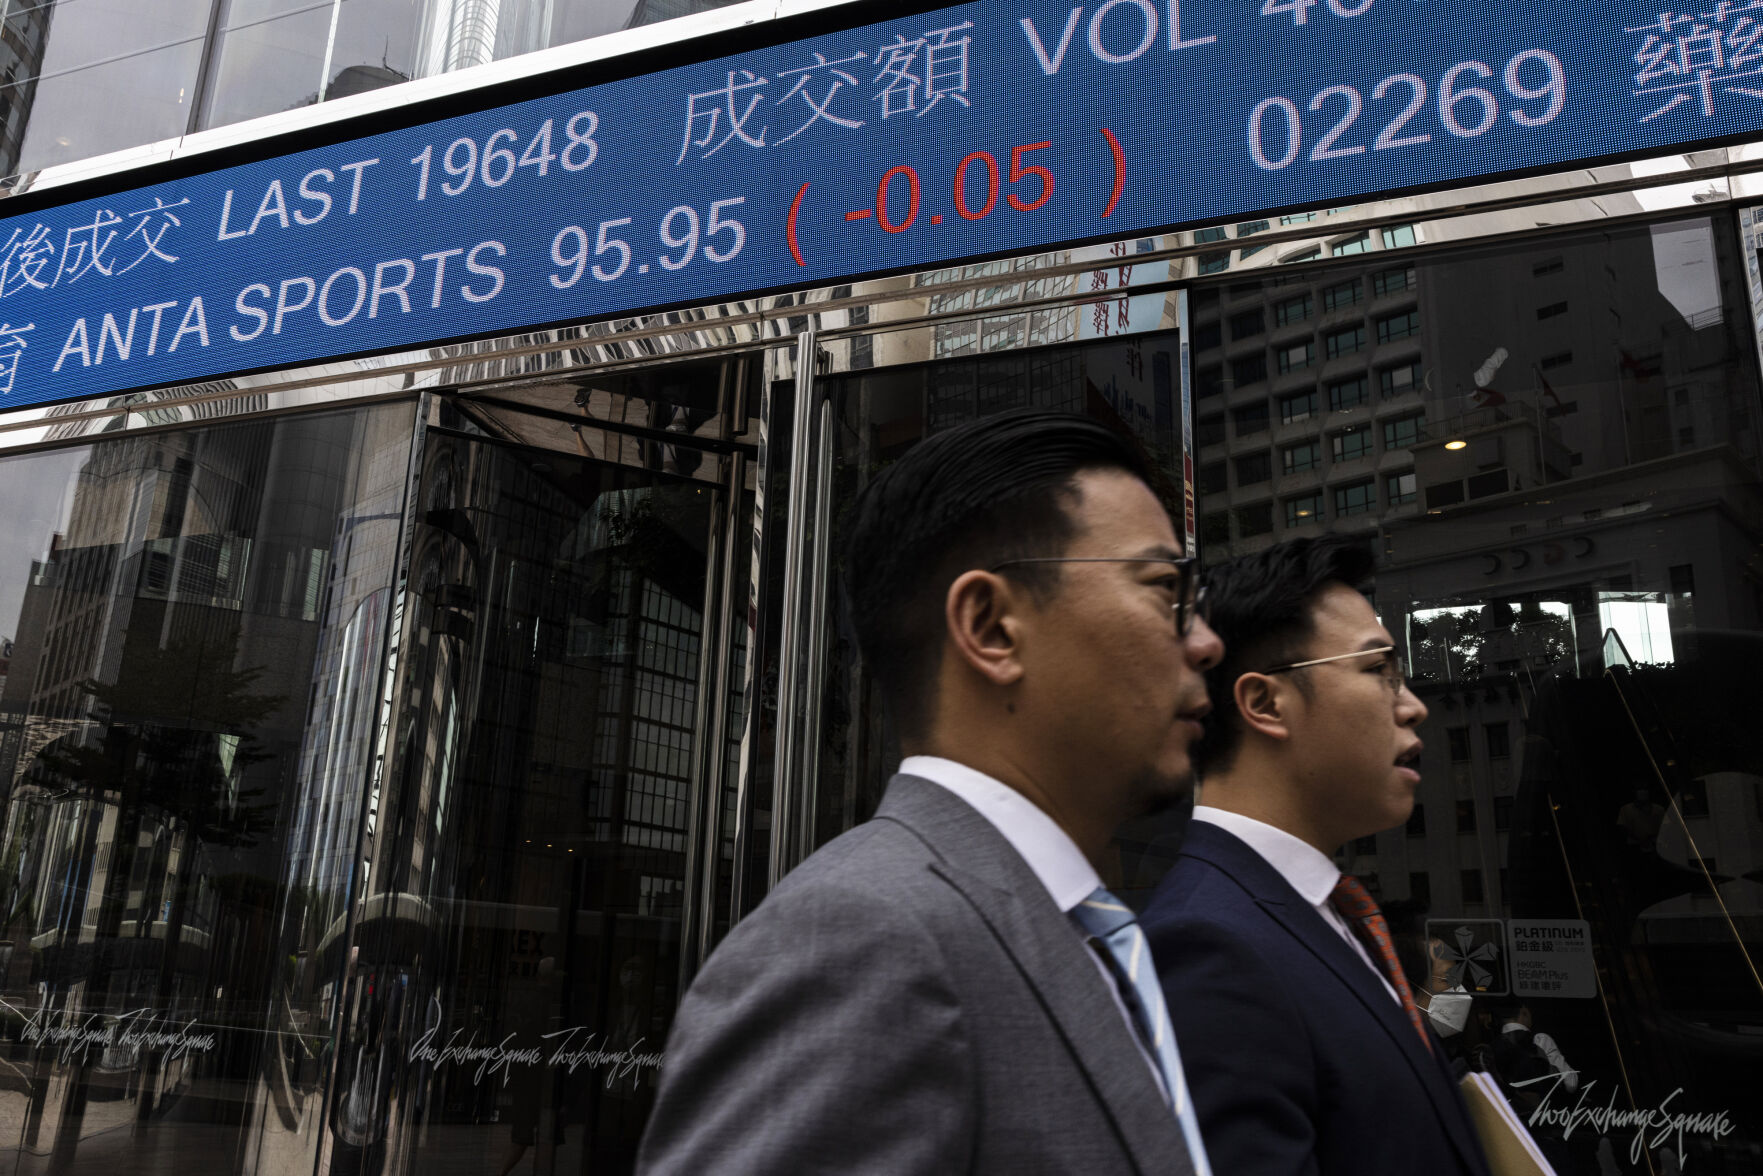 <p>Pedestrians pass by the Hong Kong Stock Exchange electronic screen in Hong Kong, Wednesday, April 26, 2023. Asian shares are trading mostly lower, as worries about the health of global economies grew after a tumble on Wall Street despite some better-than-expected earnings reports. (AP Photo/Louise Delmotte)</p>   PHOTO CREDIT: Louise Delmotte - staff, AP